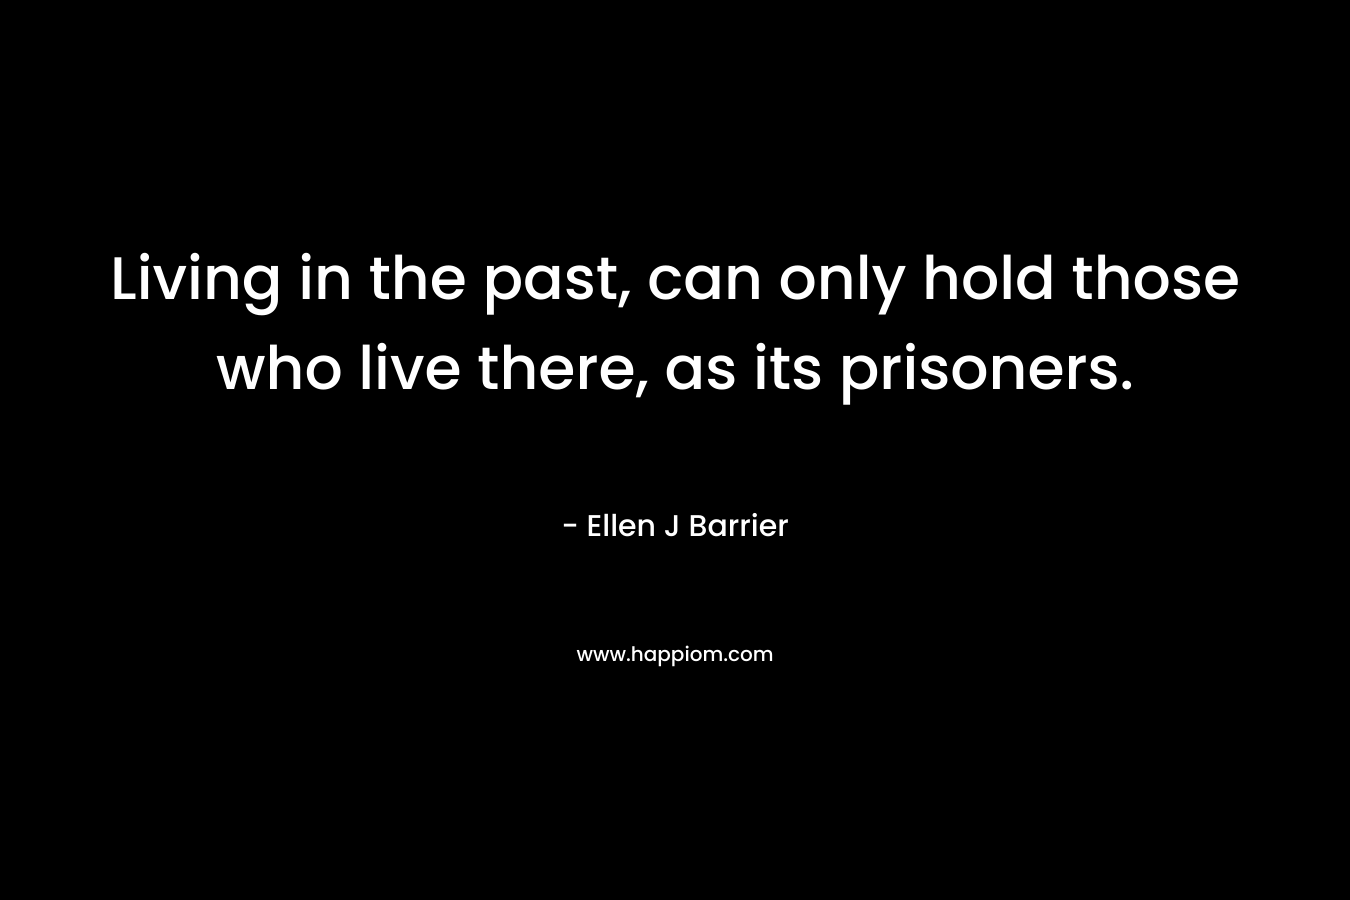 Living in the past, can only hold those who live there, as its prisoners.